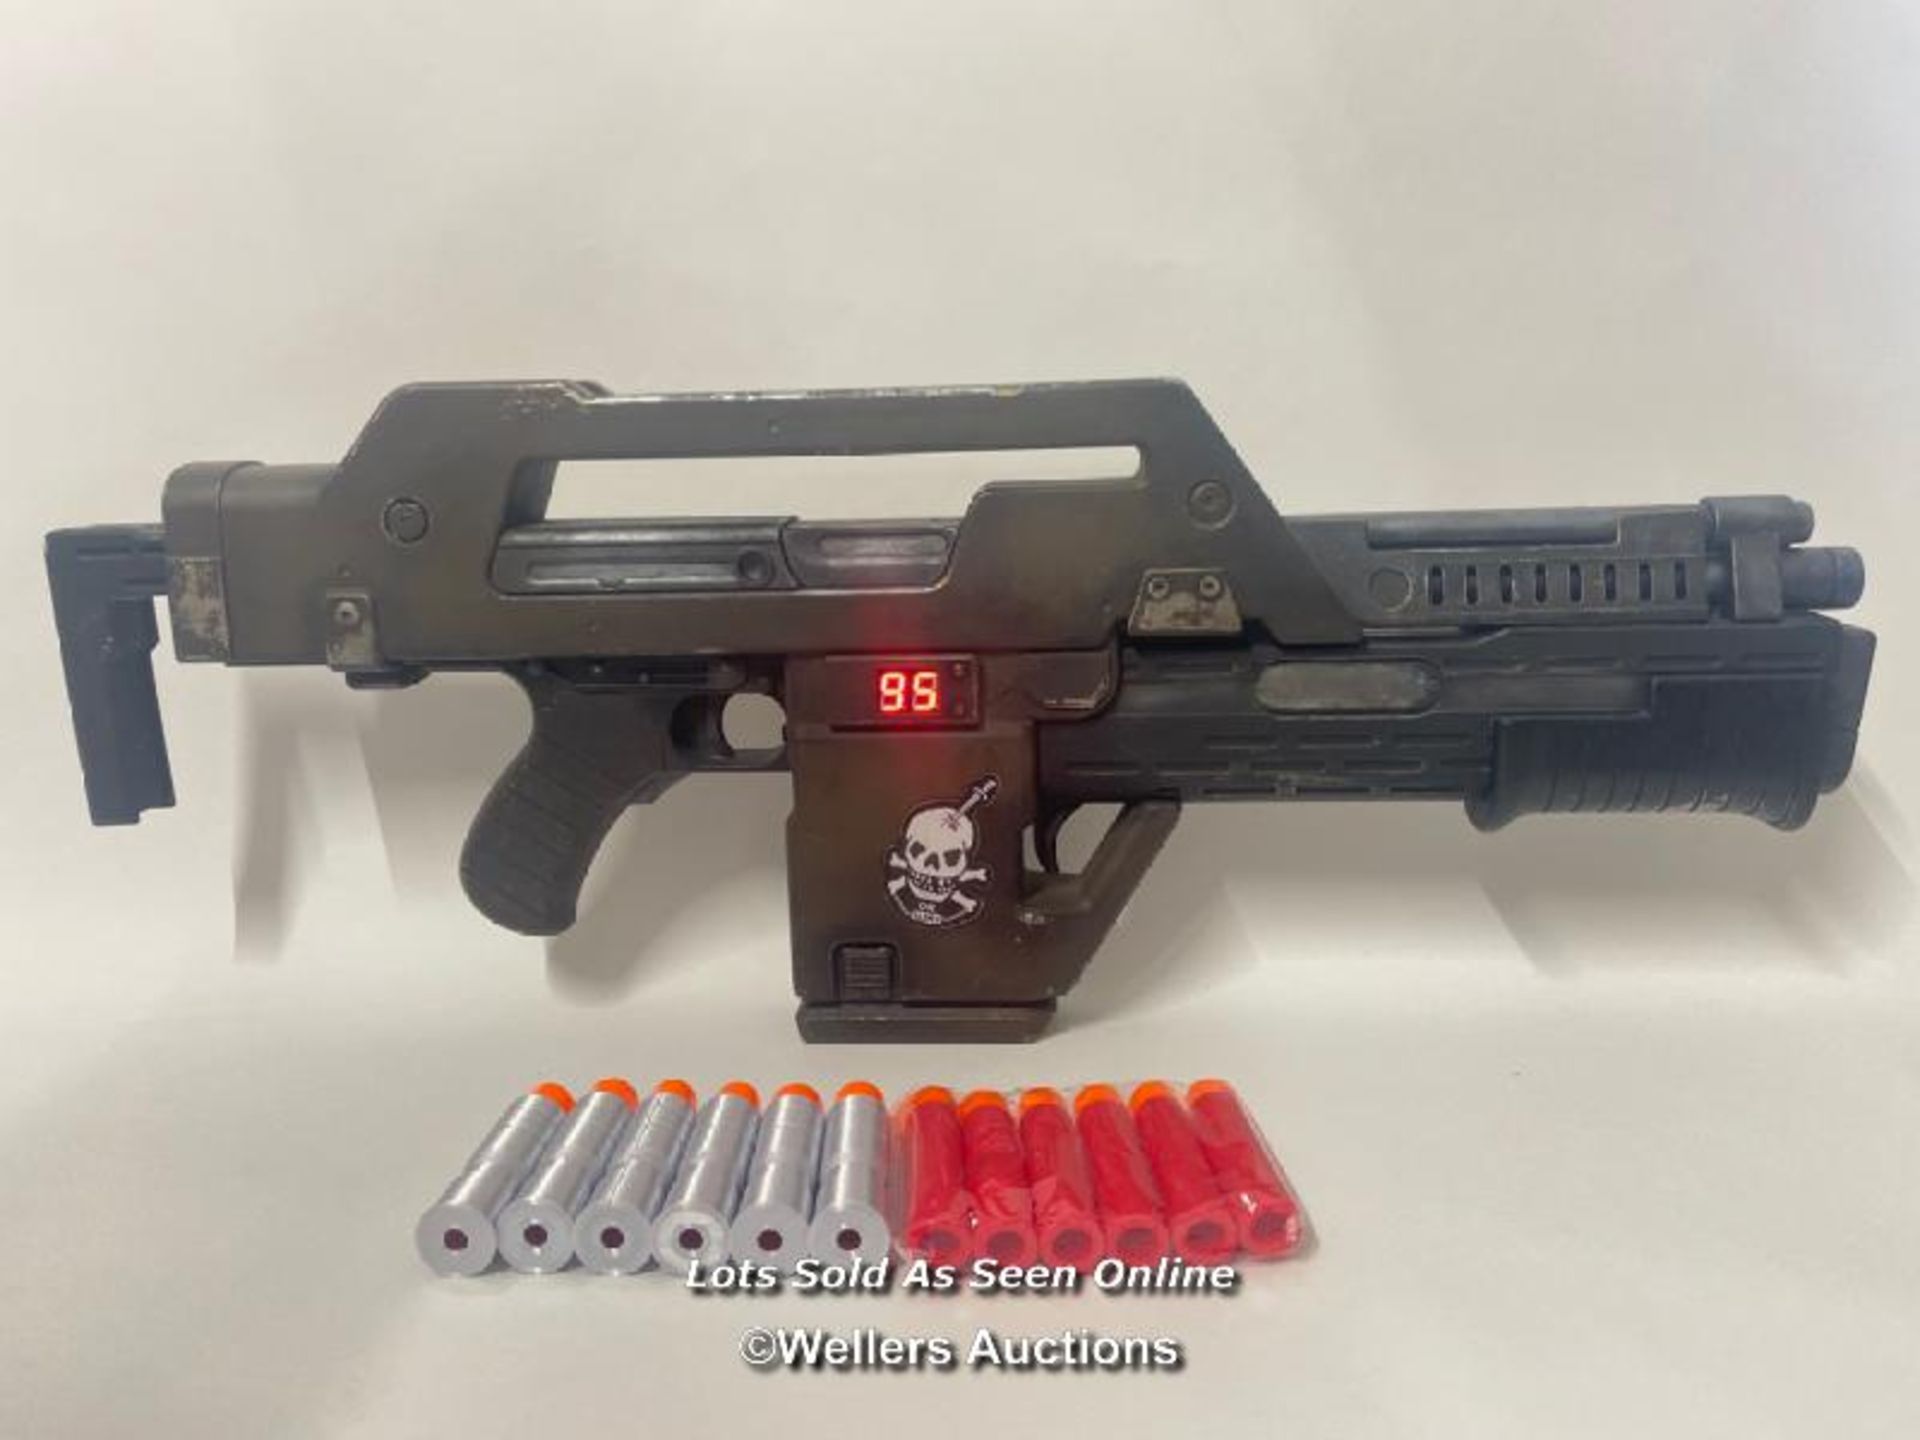 Alien - M41A pulse rifle fully working Nerf gun, with digital ammo countdown 0-99, rapid fire